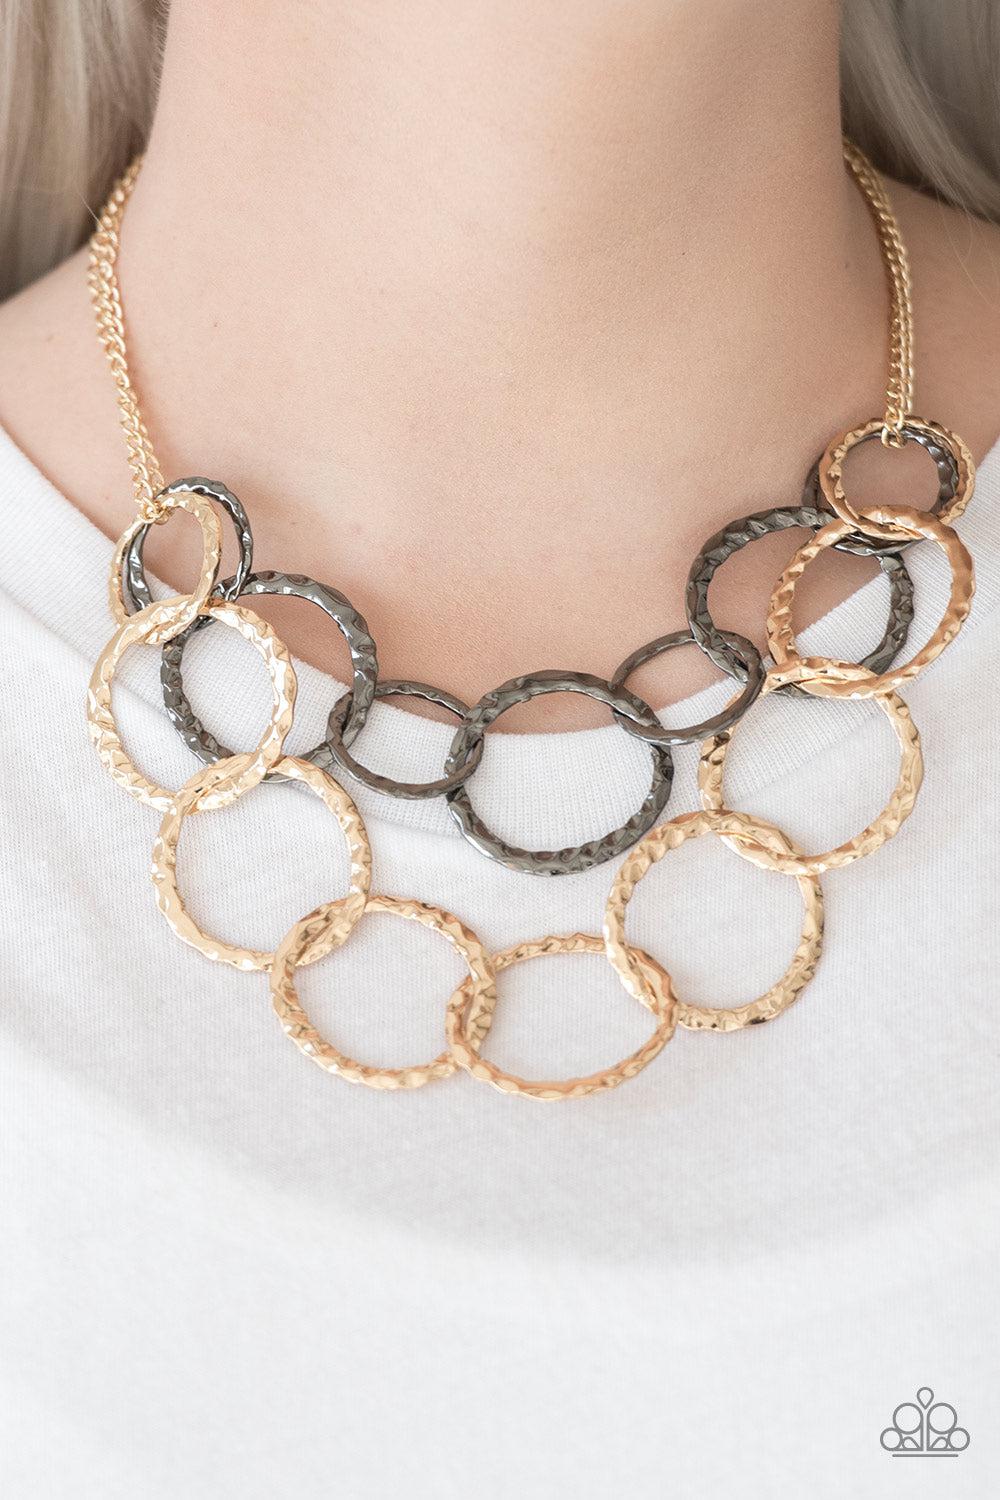 Radiant Ringmaster Multi Gold &amp; Gunmetal Necklace - Paparazzi Accessories-on model - CarasShop.com - $5 Jewelry by Cara Jewels